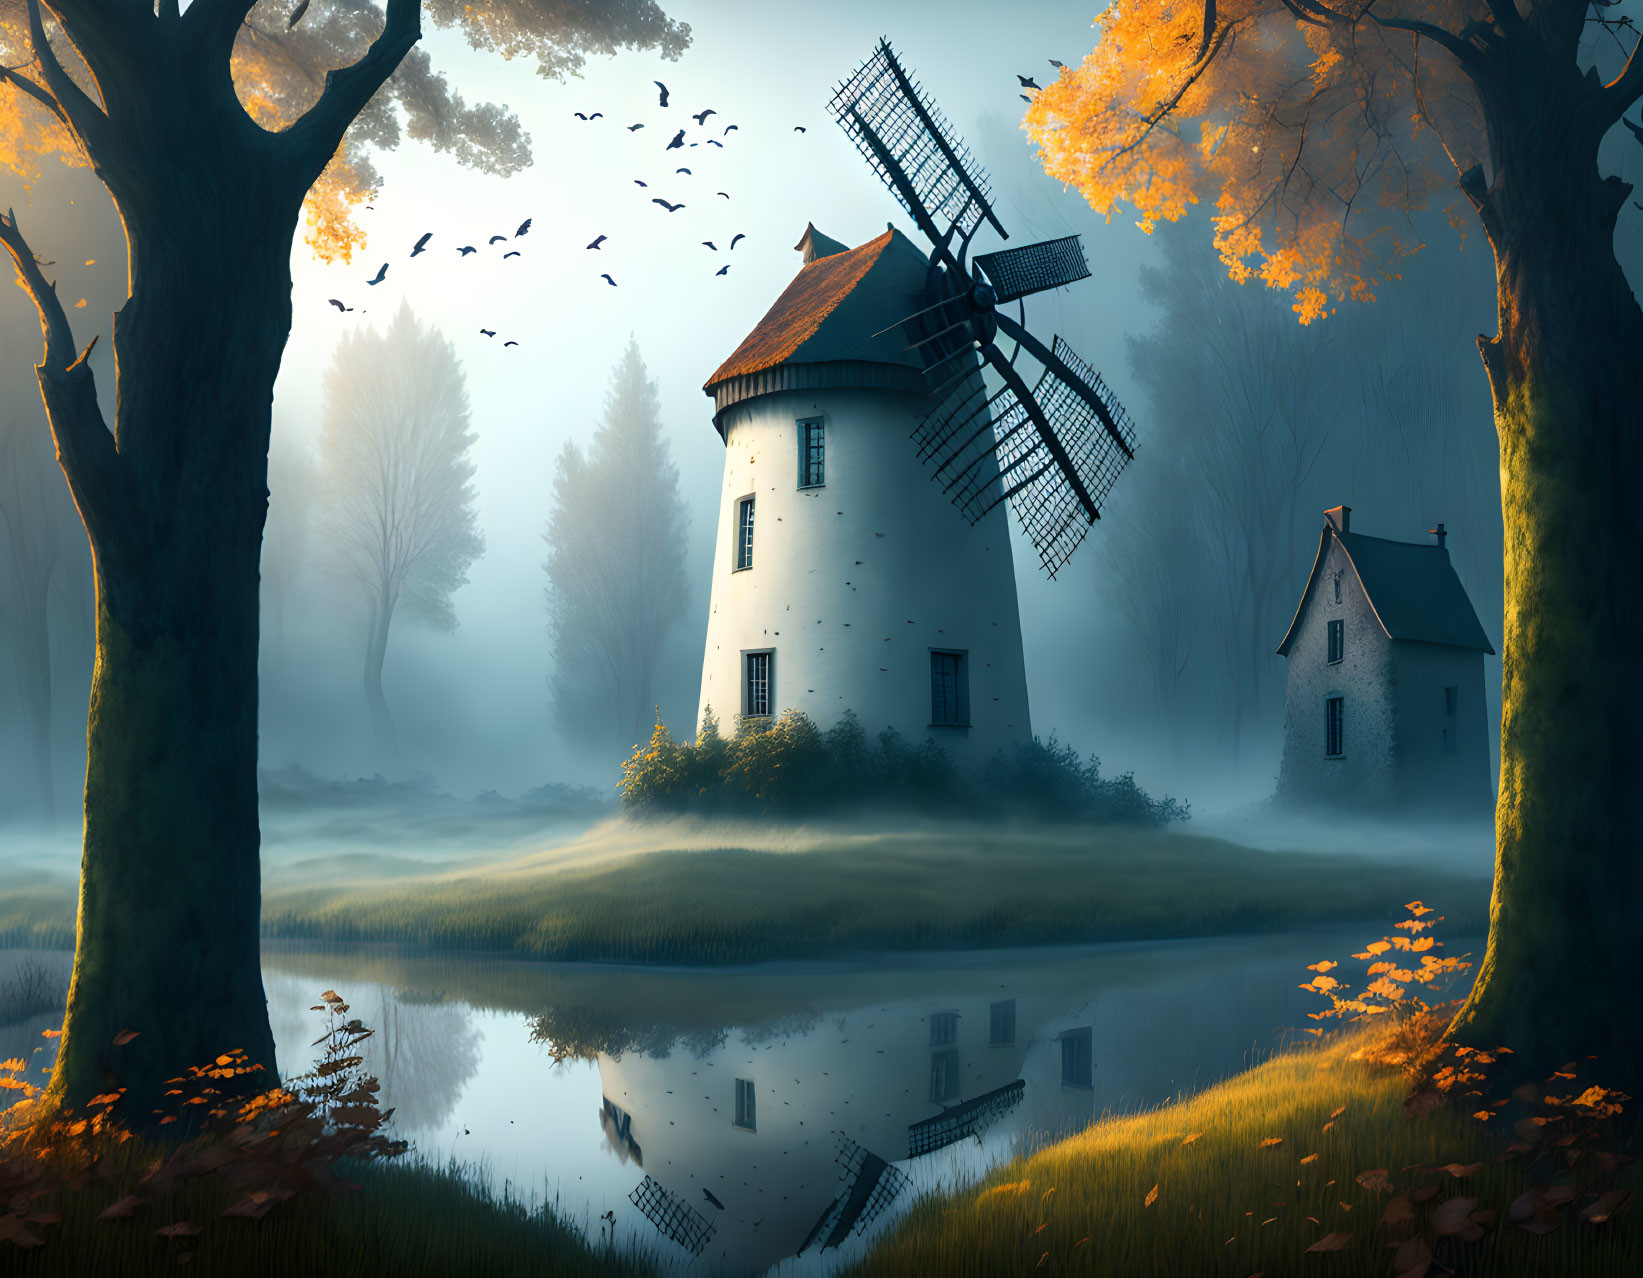 Tranquil autumn landscape with windmill, house, and foggy pond